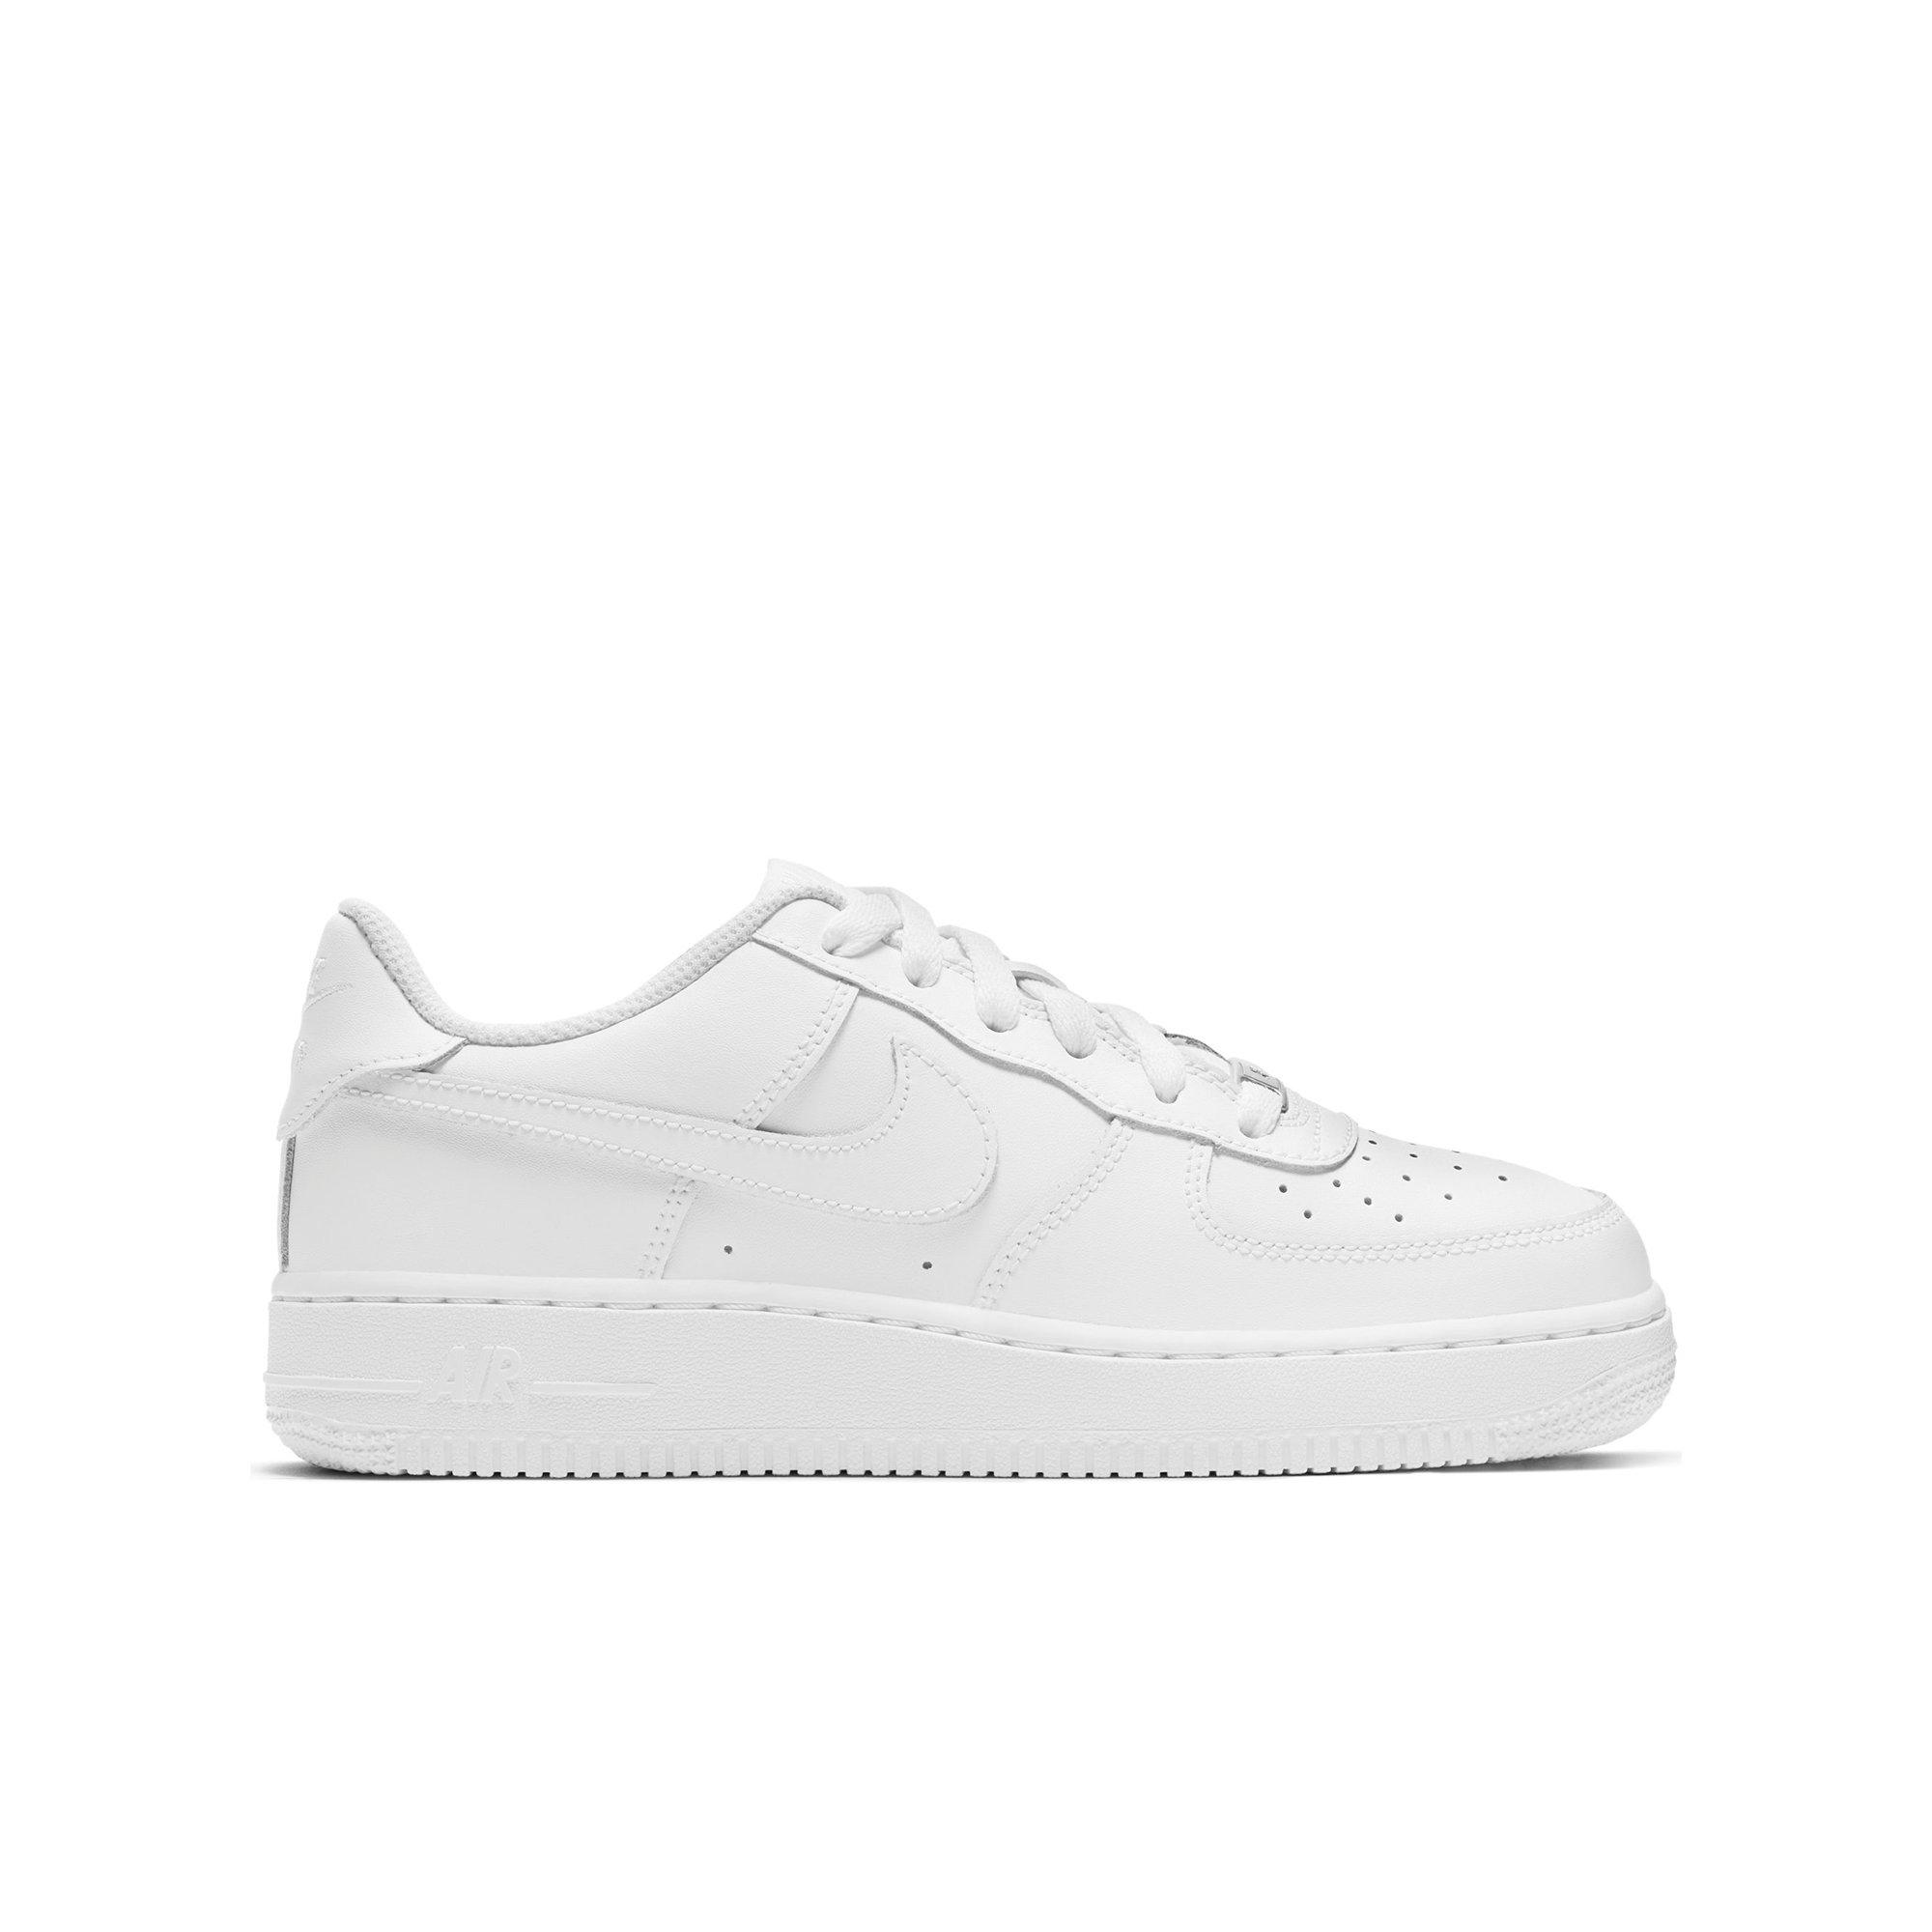 all white air forces boys